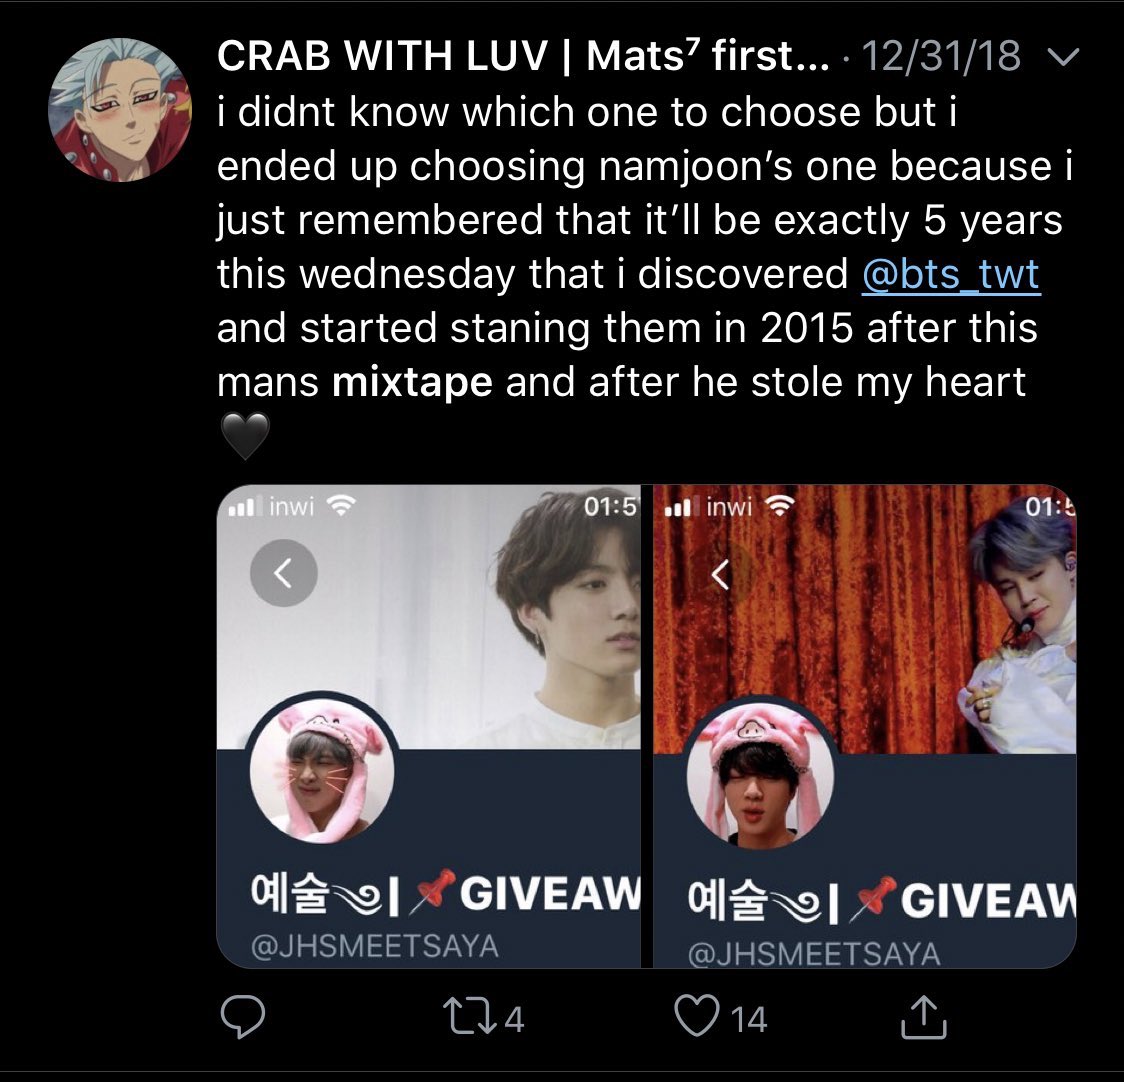 This was something else I noticed that was very  to me. Supposedly claimed to start stanning in January 2015 because of Joon’s first mixtape, but Joon’s first mixtape wasn’t released until March 2015. Also lol at the math here 2015-2019 is 4 years, not 5 